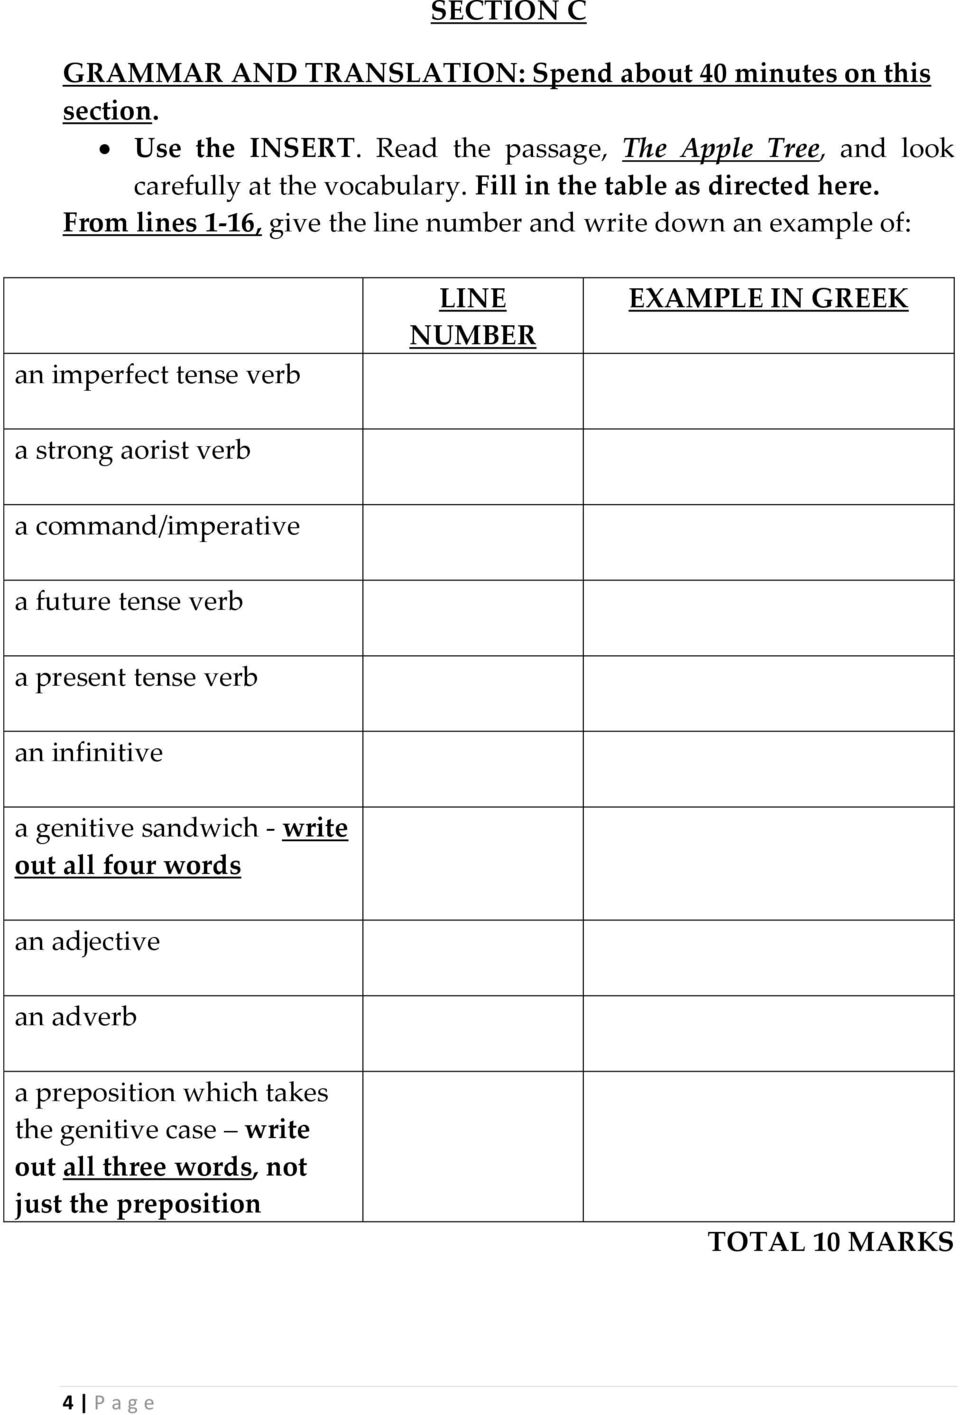 From lines 1-16, give the line number and write down an example of: an imperfect tense verb LINE NUMBER EXAMPLE IN GREEK a strong aorist verb a